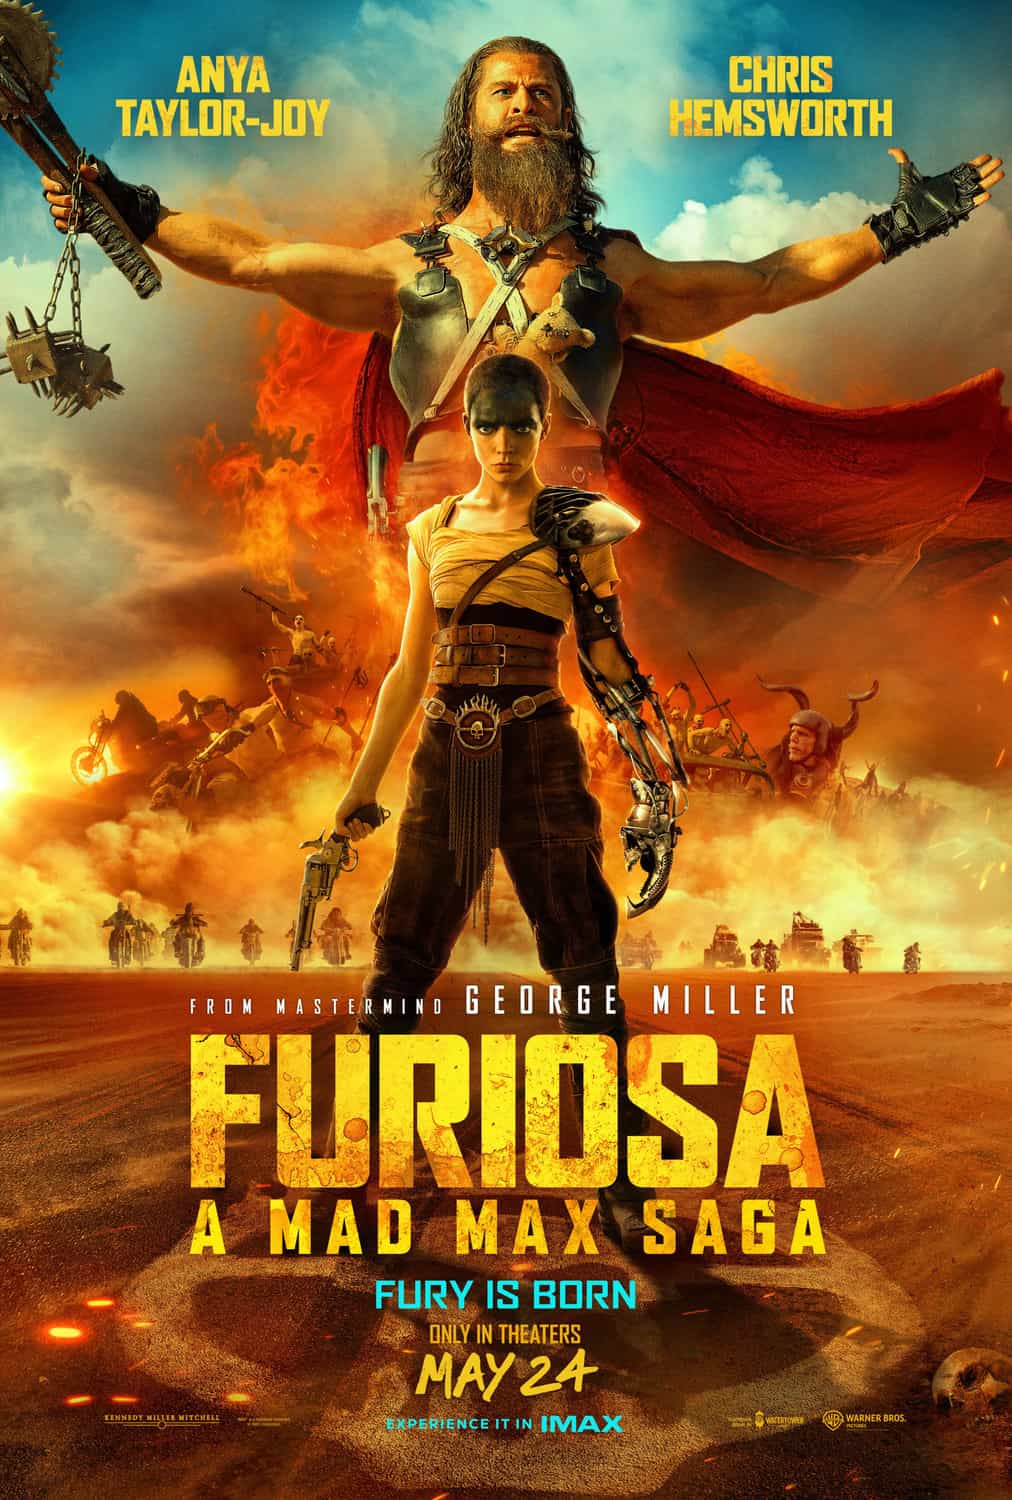 Furiosa: A Mad Max Saga is given a 15 age rating in the UK for strong violence, injury detail